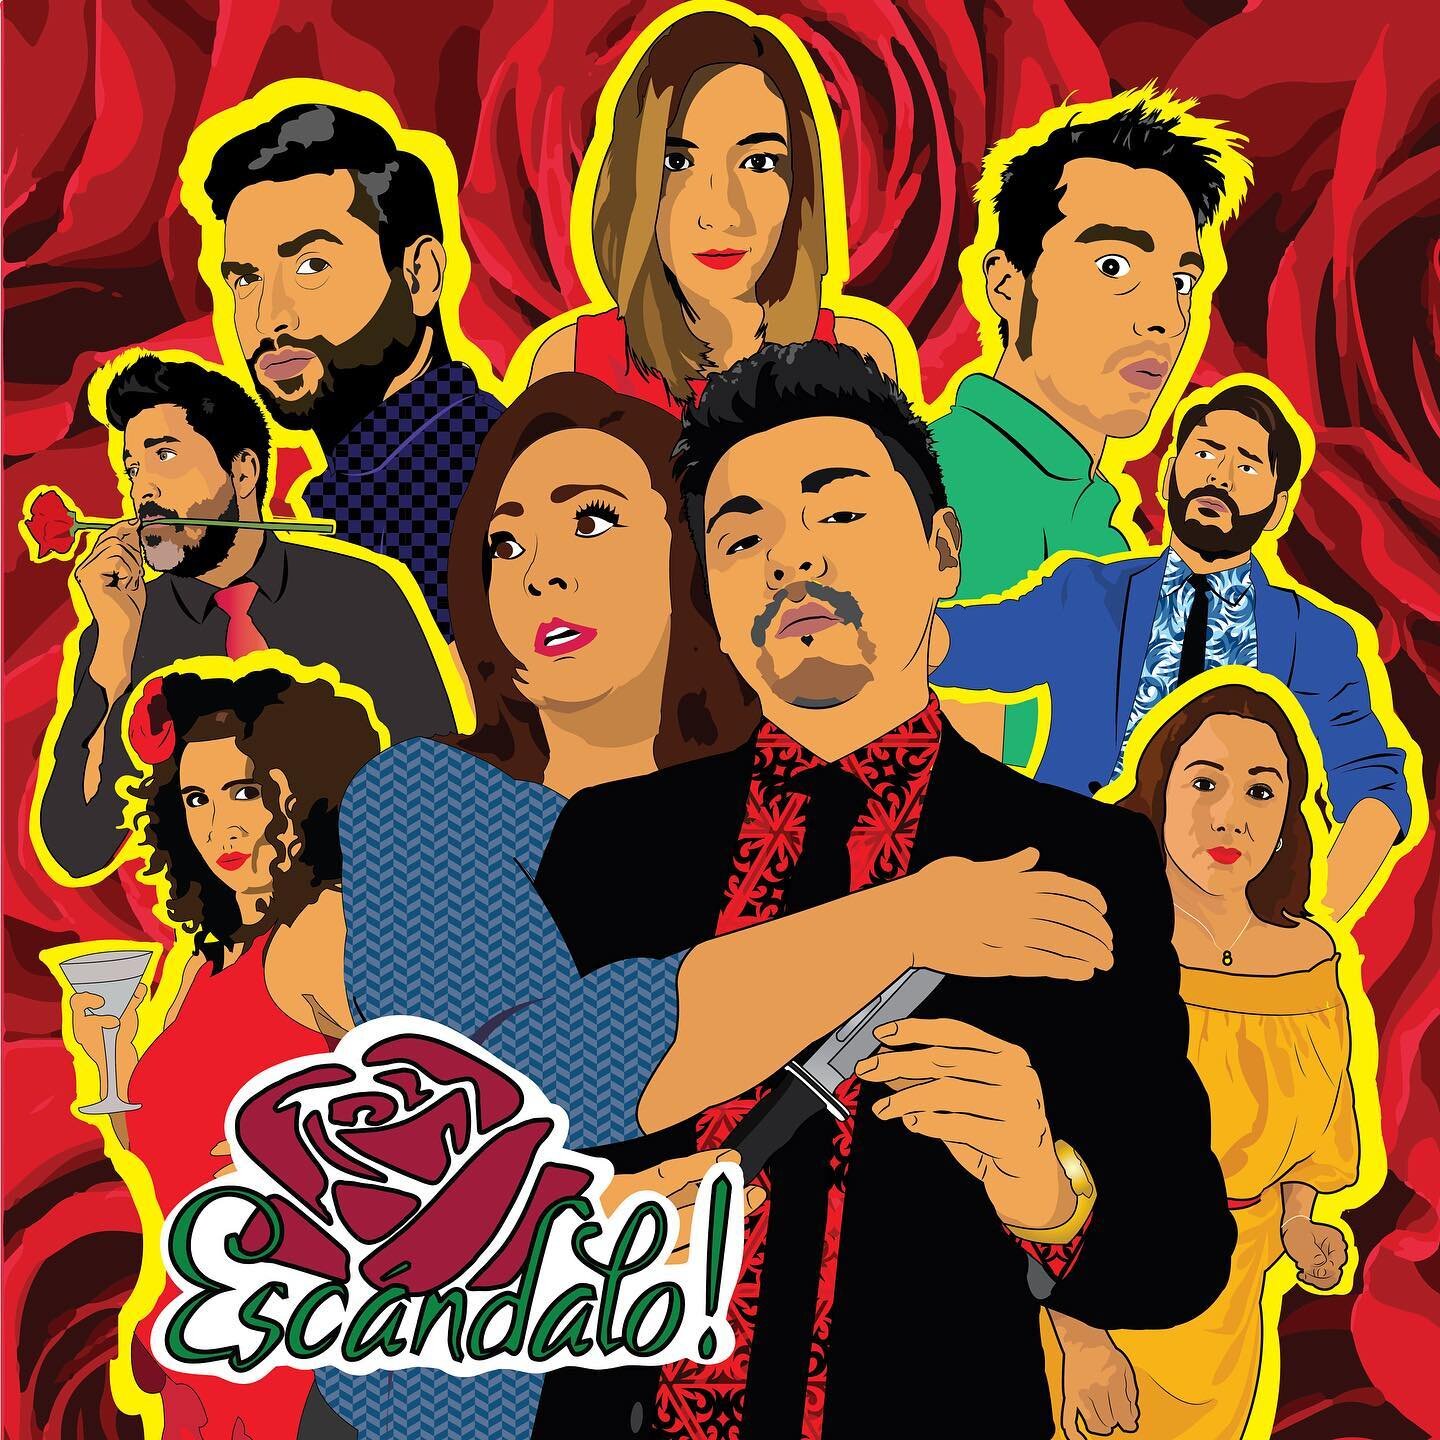 Artwork we made for &iexcl;Esc&agrave;ndalo! 

Catch @micco6 (in the blue blazer 👀🕺🏽) at their show tomorrow! 8pm

#Repost @escandaloimprov
・・・
New poster - notice the difference?  It&rsquo;s our newest cast member!

Welcome Valencia!
🌹💃🏻🌹💃🏻